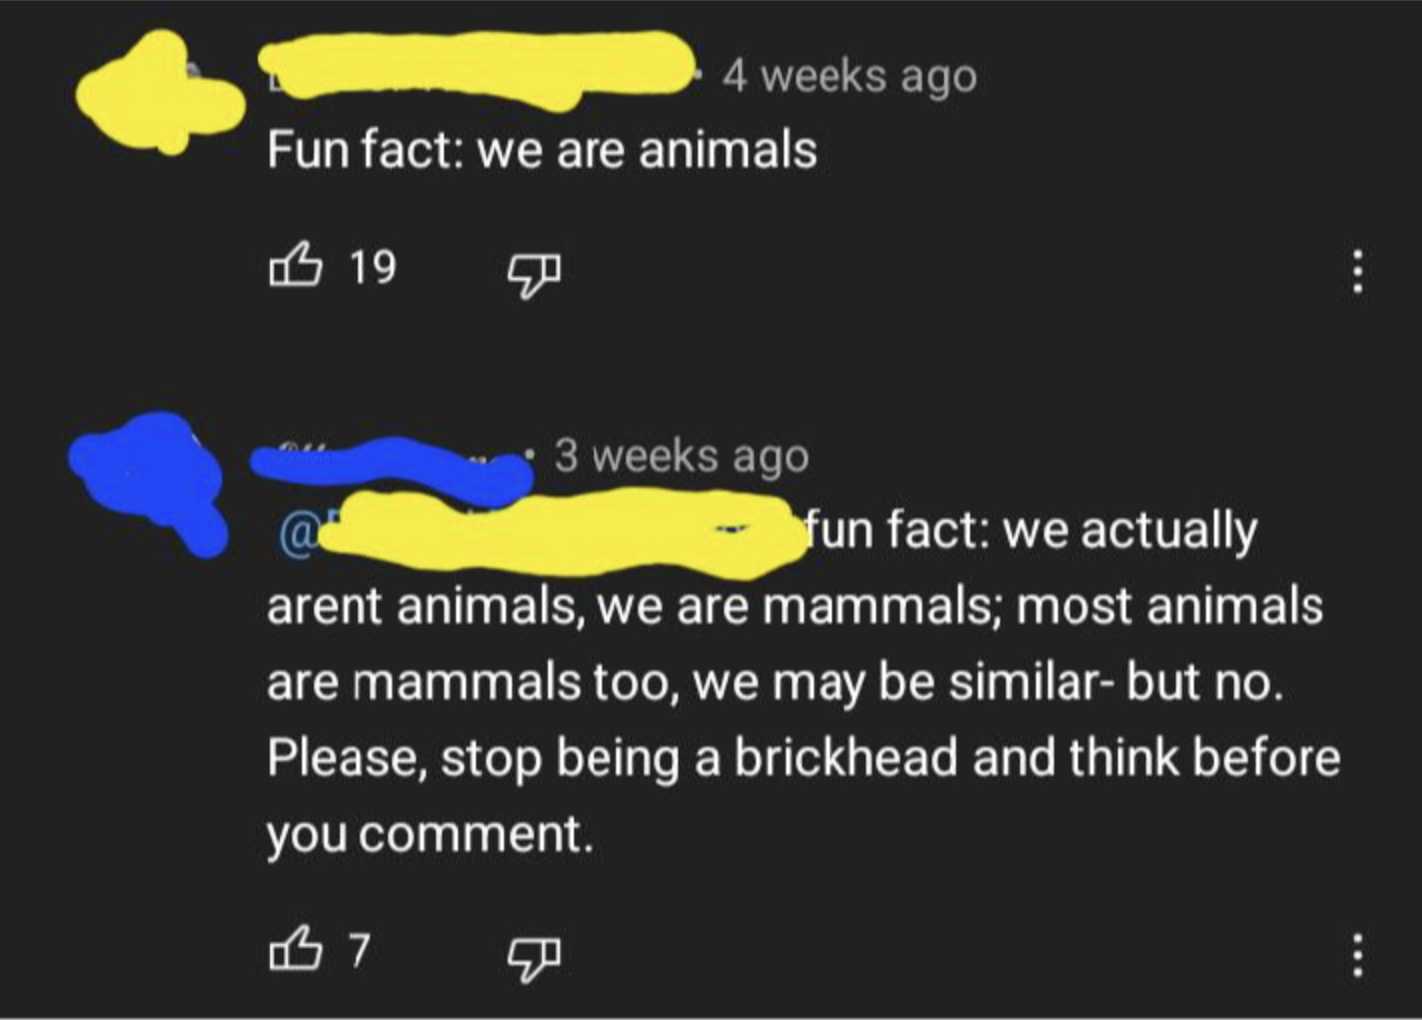 Person says &quot;Fun fact: we are animals,&quot; and person answers: &quot;fun fact: we actually aren&#x27;t animals, we are mammals; most animals are mammals too; we may be similar, but no — stop being a brickhead and think before you comment&quot;